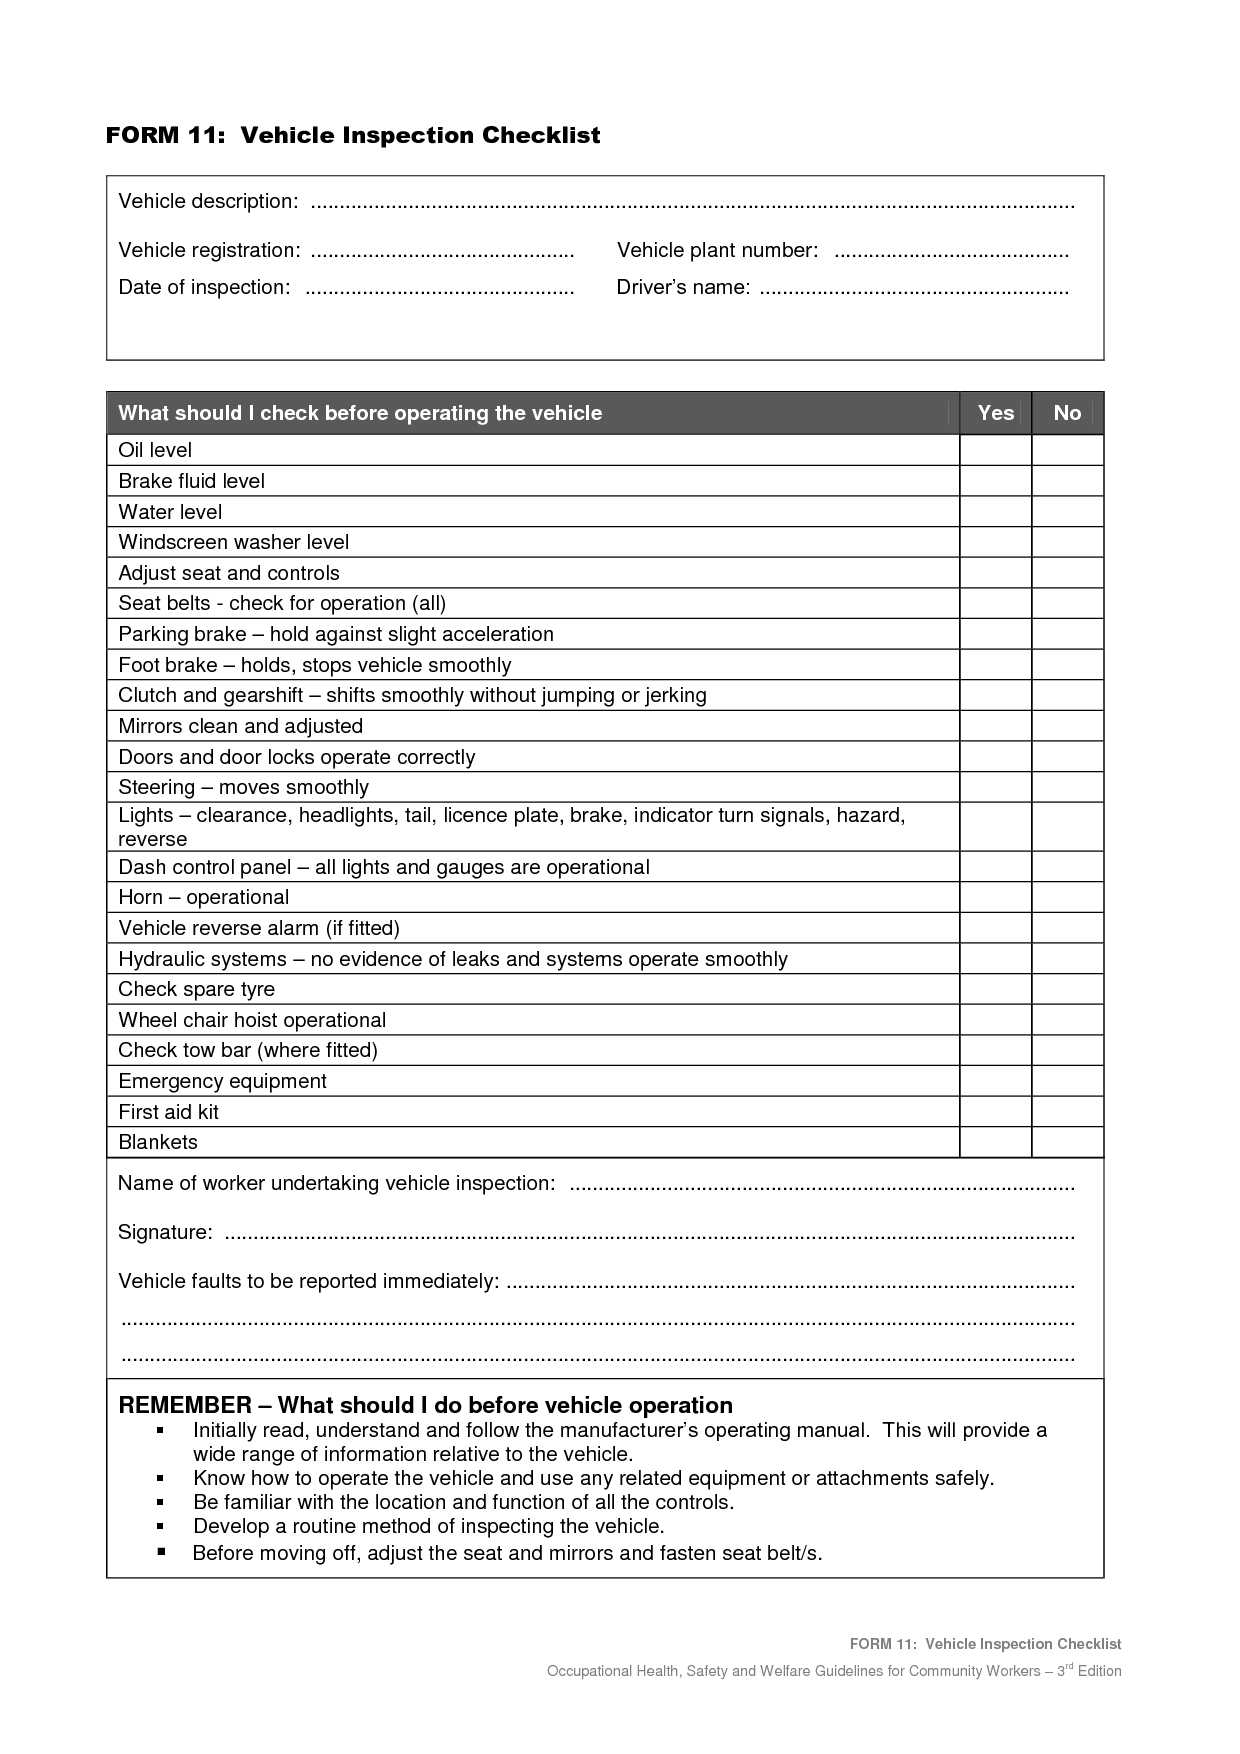 Vehicle Safety Inspection Checklist Form | Car Maintenance In Annual Health And Safety Report Template